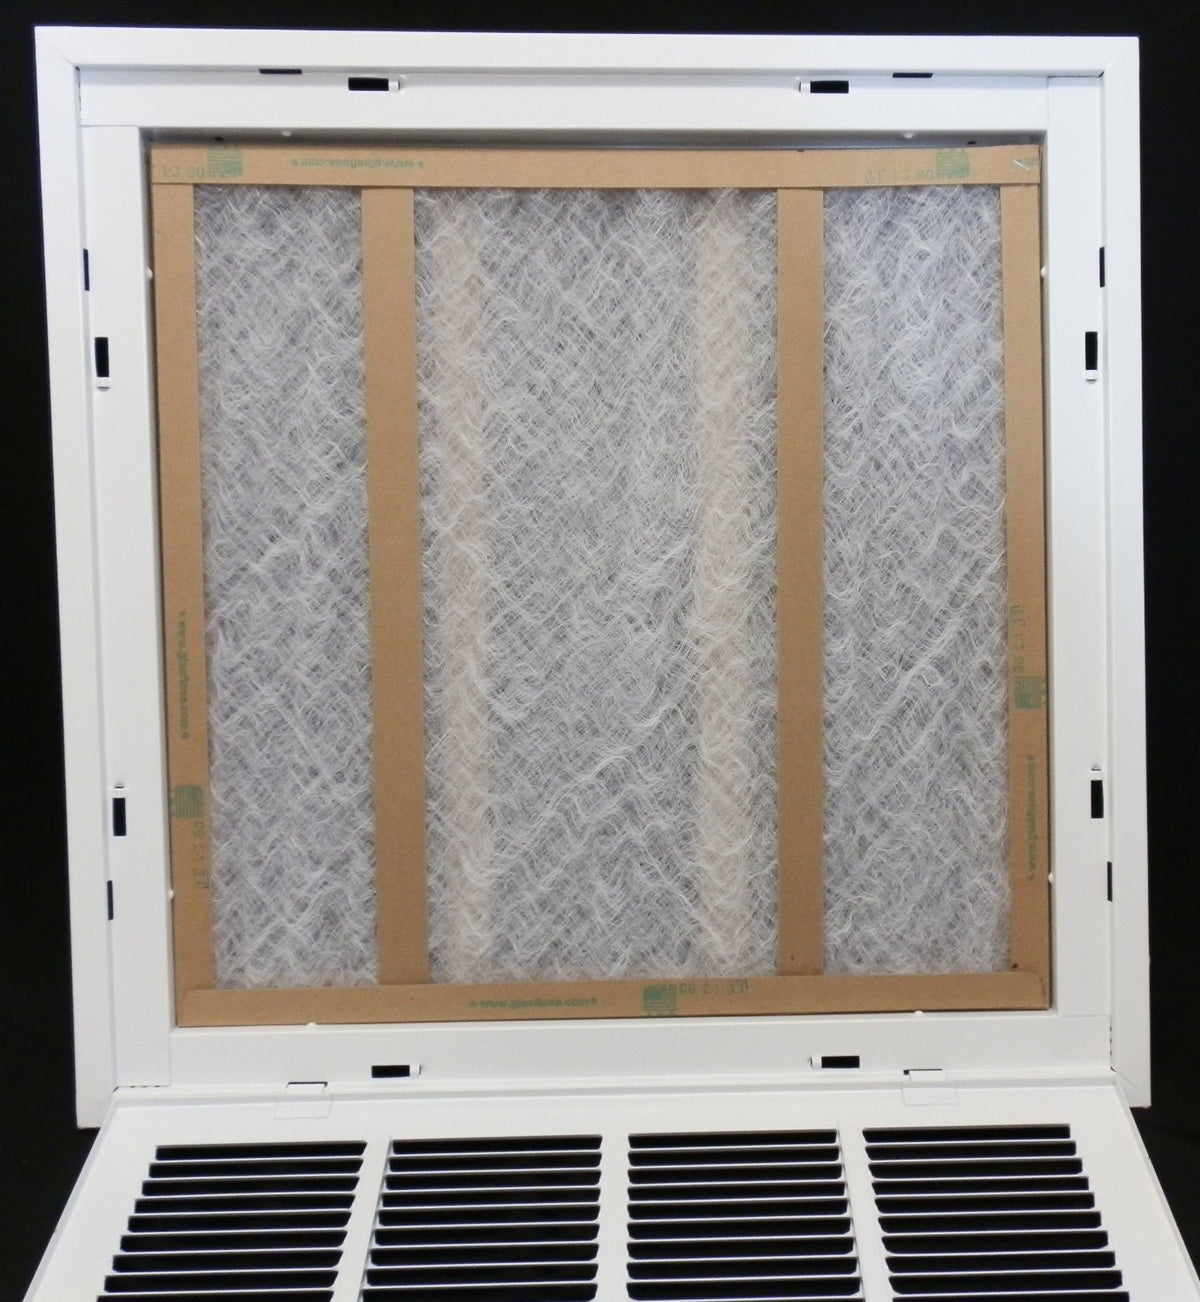 18&quot; X 24&quot; Steel Return Air Filter Grille for 1&quot; Filter - Removable Frame - [Outer Dimensions: 20 5/8&quot; X 26 5/8&quot;]